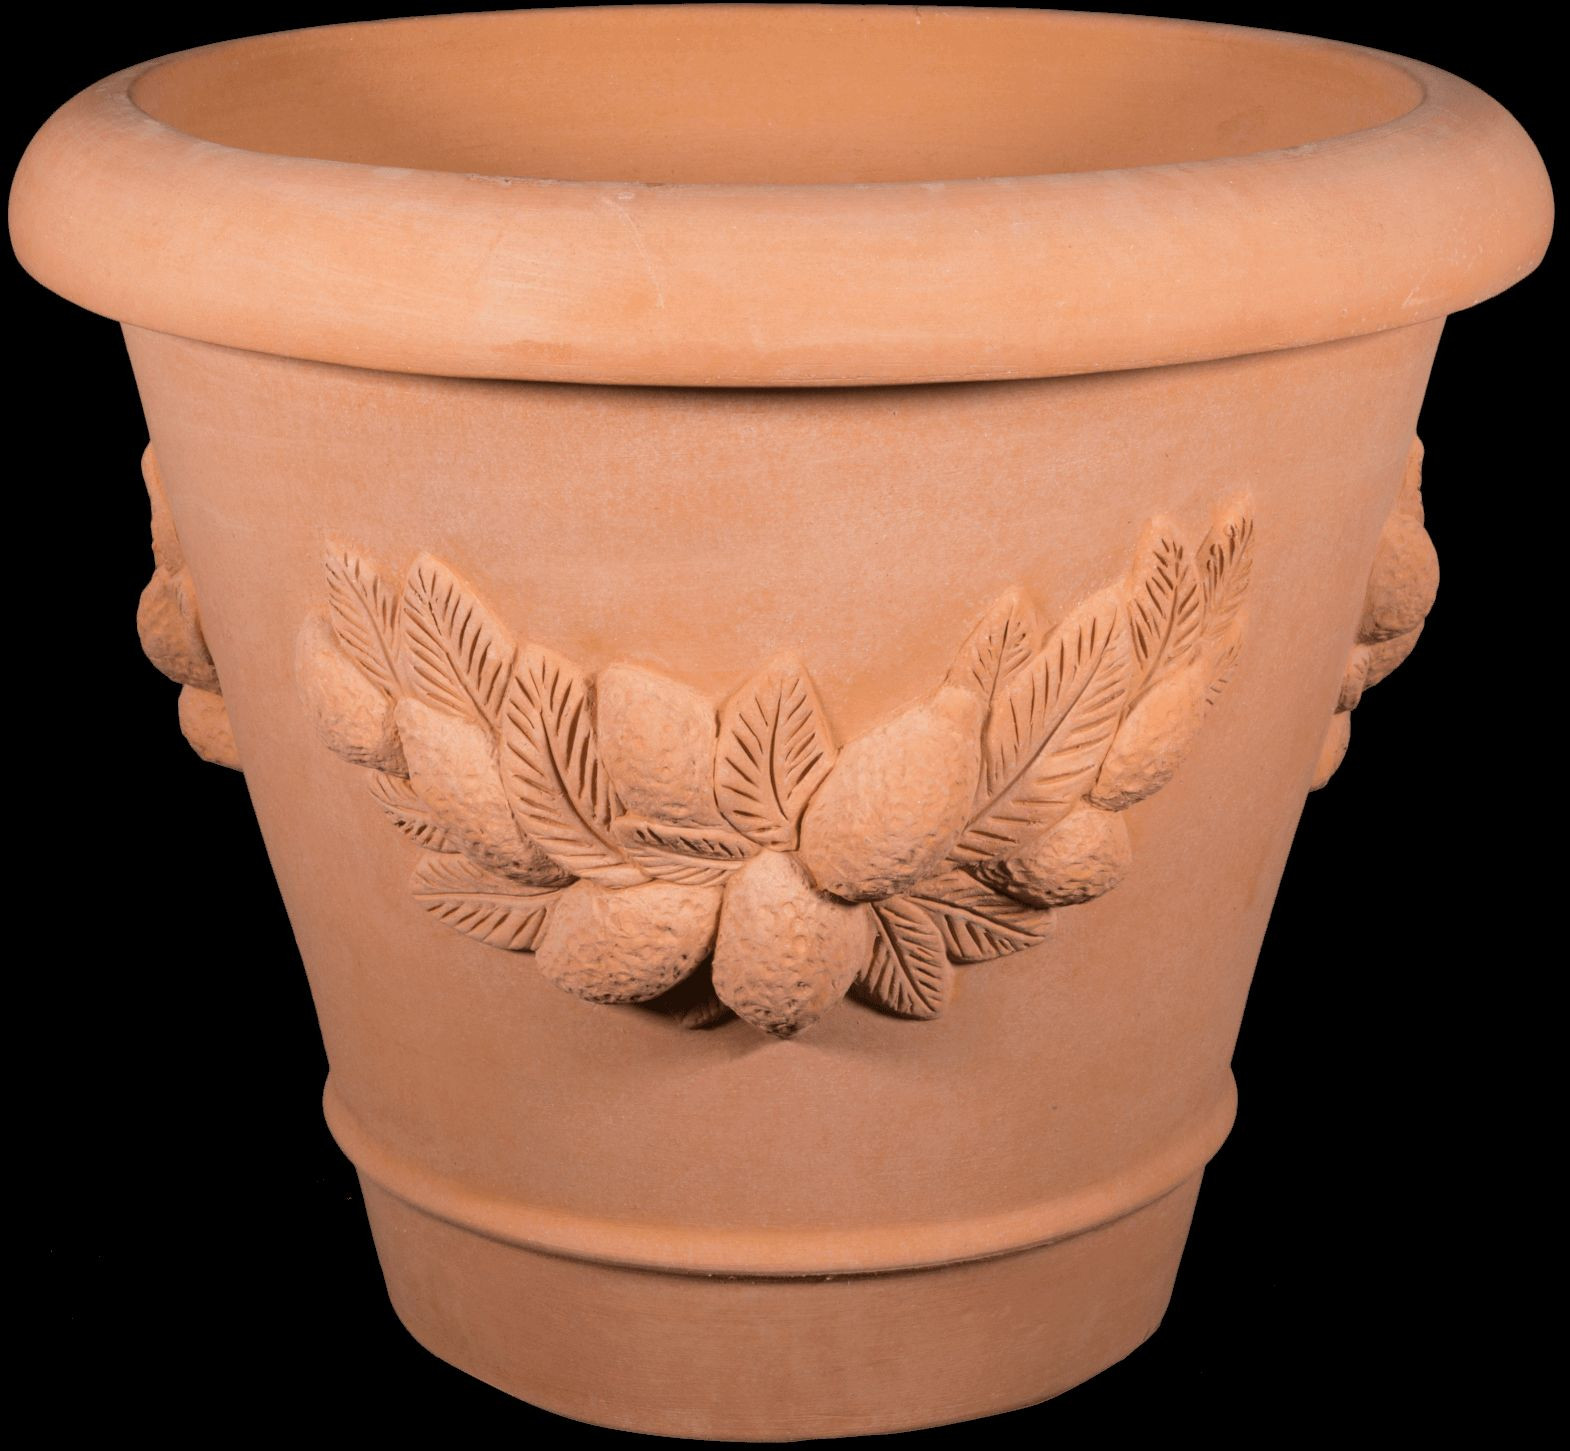 30 Great Terracotta Vases wholesale 2024 free download terracotta vases wholesale of plastic square vase lovely terracotta vases for sale from impruneta for plastic square vase lovely terracotta vases for sale from impruneta